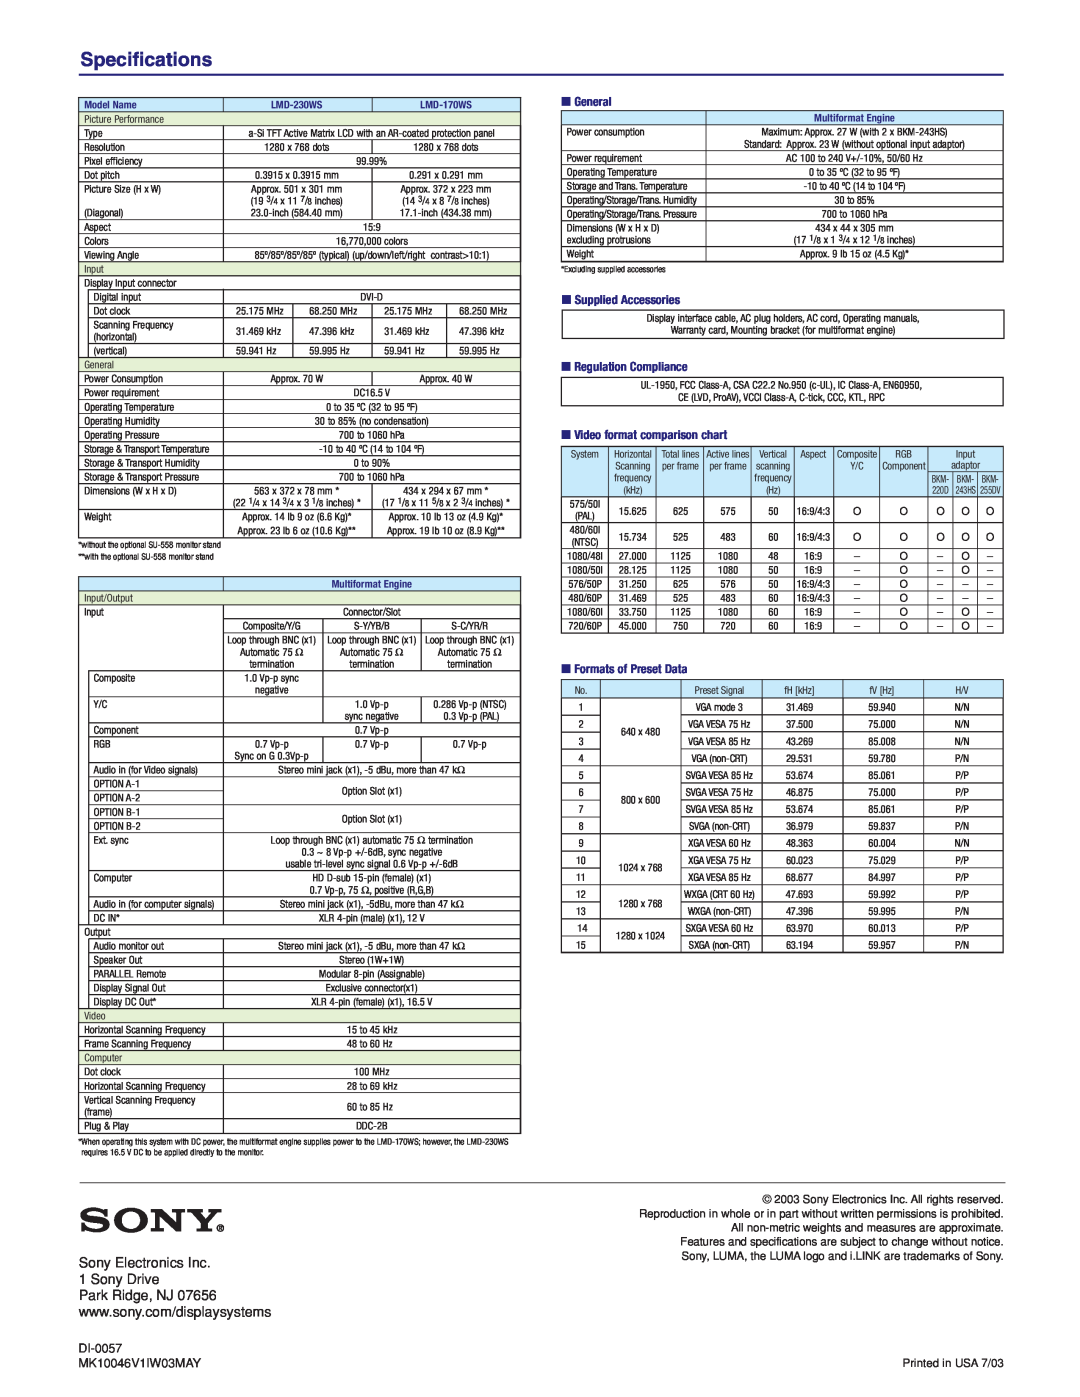 Sony LMD-170WS manual Specifications, General, Supplied Accessories, Regulation Compliance, Video format comparison chart 